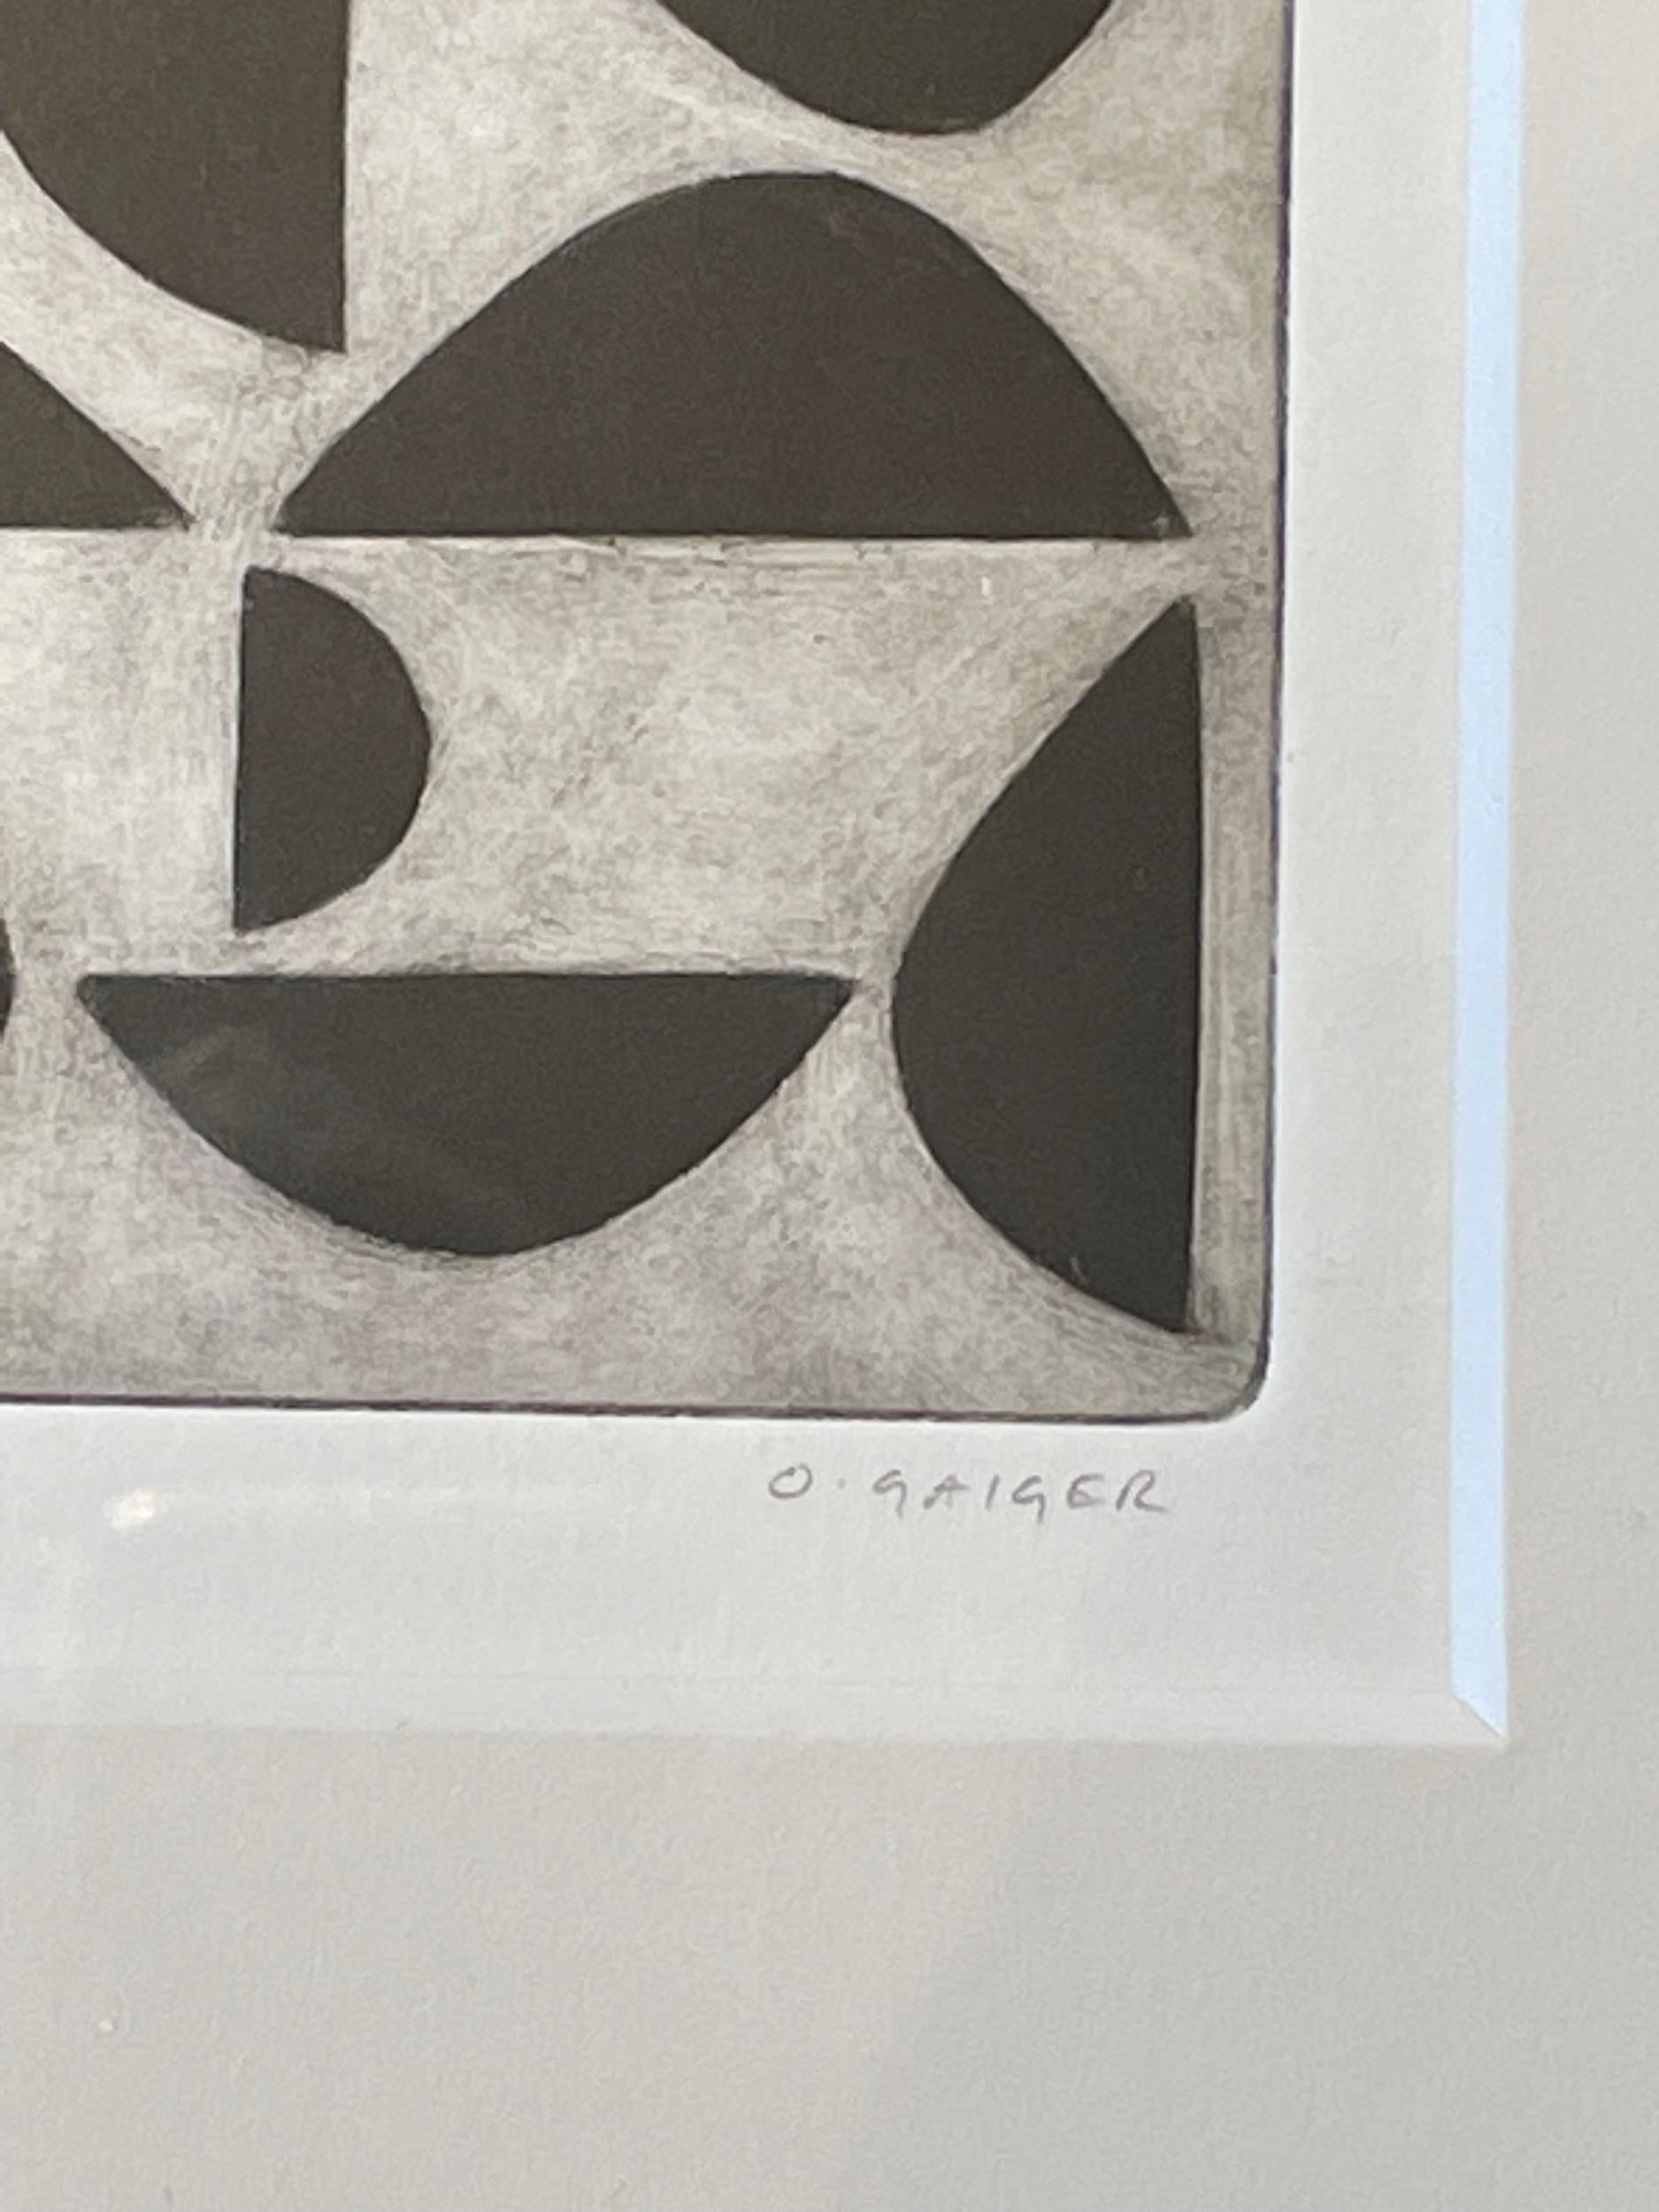 Contemporary abstract black and white etching by English artist Oliver Gaiger.
Matted and framed in a charcoal grey wood frame.
Part of a large collection of black and white etchings by the artist
Oliver Gaiger was born in 1972 in Uganda and lives